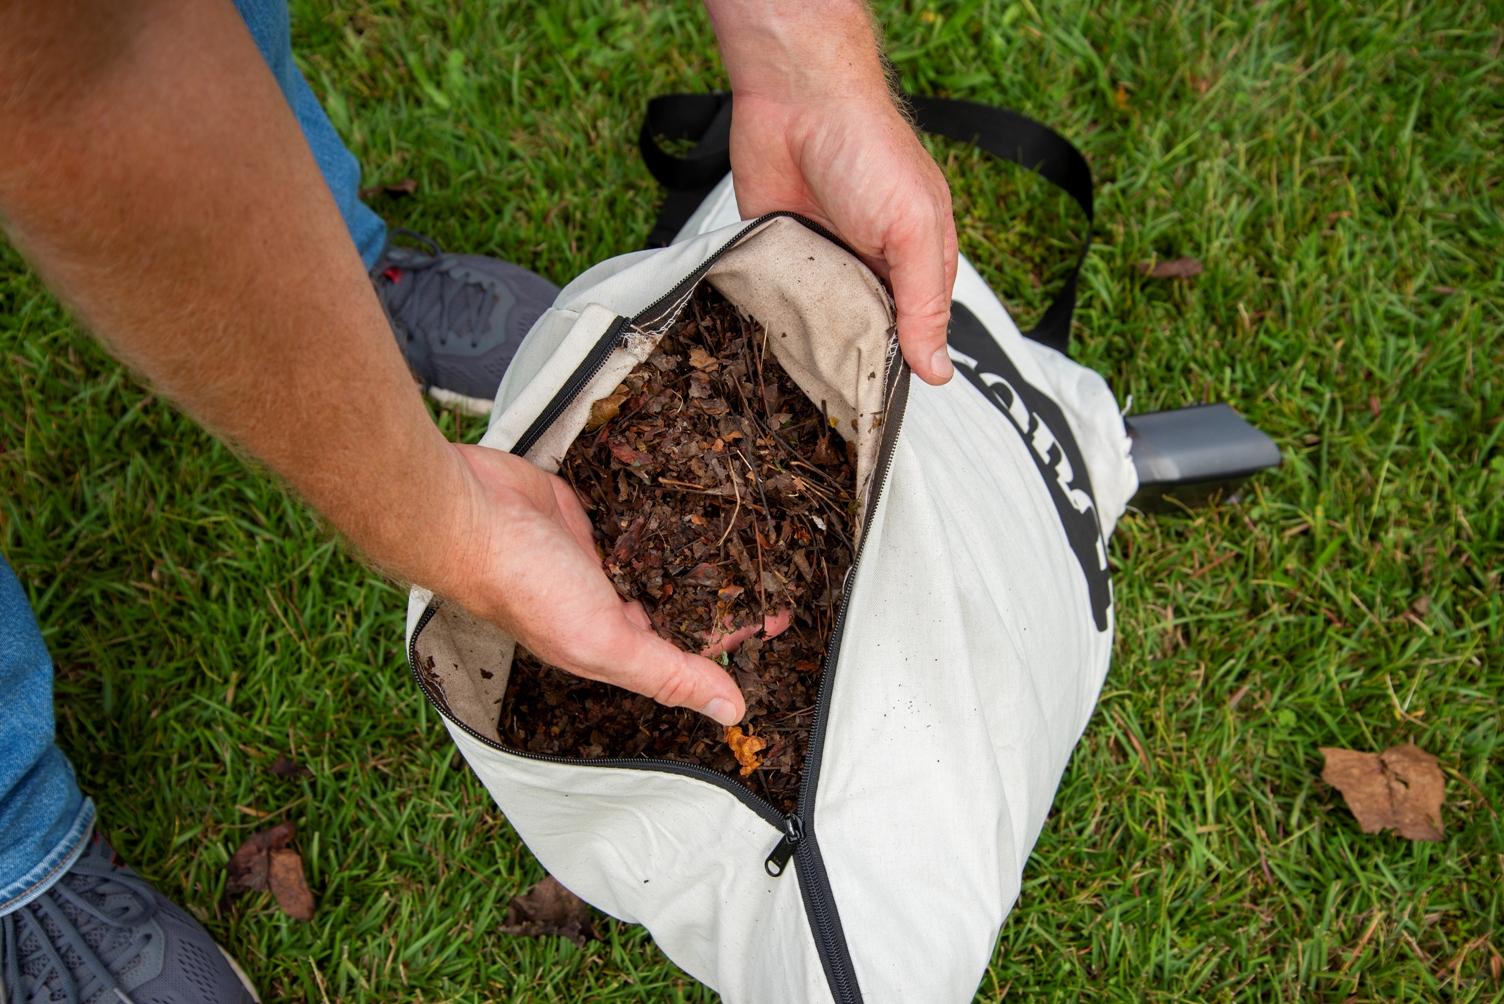 A person reaching into a bag full of mulched leaves created by the best leaf vacuum option